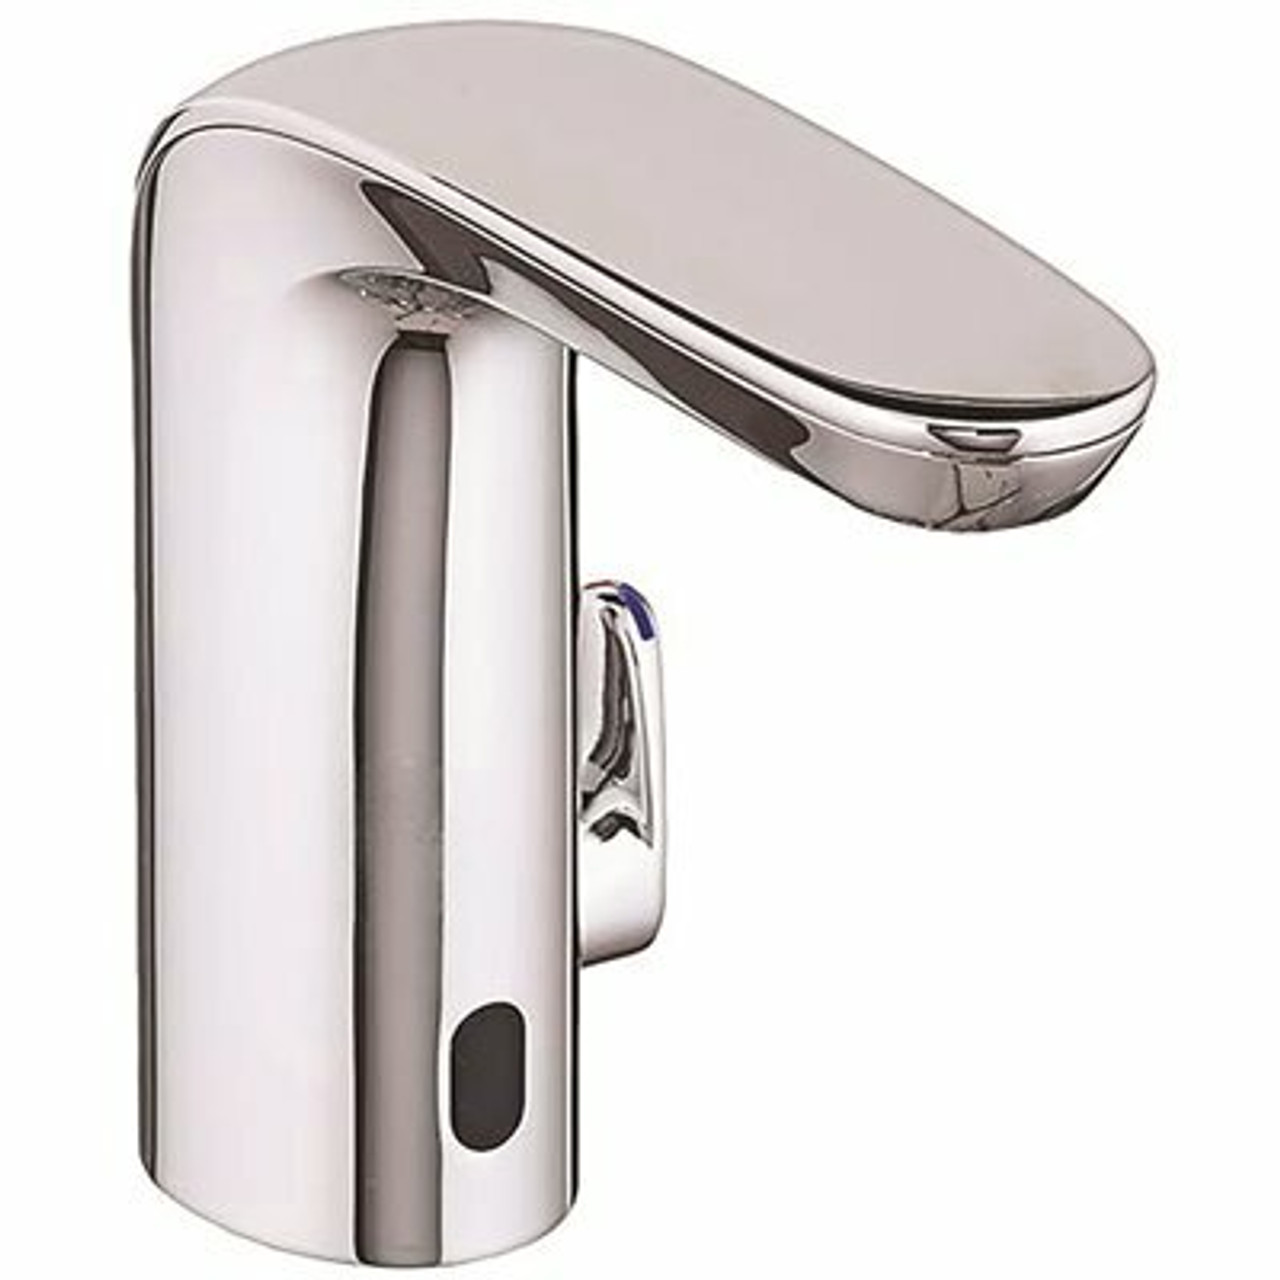 Nextgen Selectronic Battery Power Single Hole Touchless Bathroom Faucet, Smarttherm Safety Shut-Off In Chrome (4-Pack) - 316470470